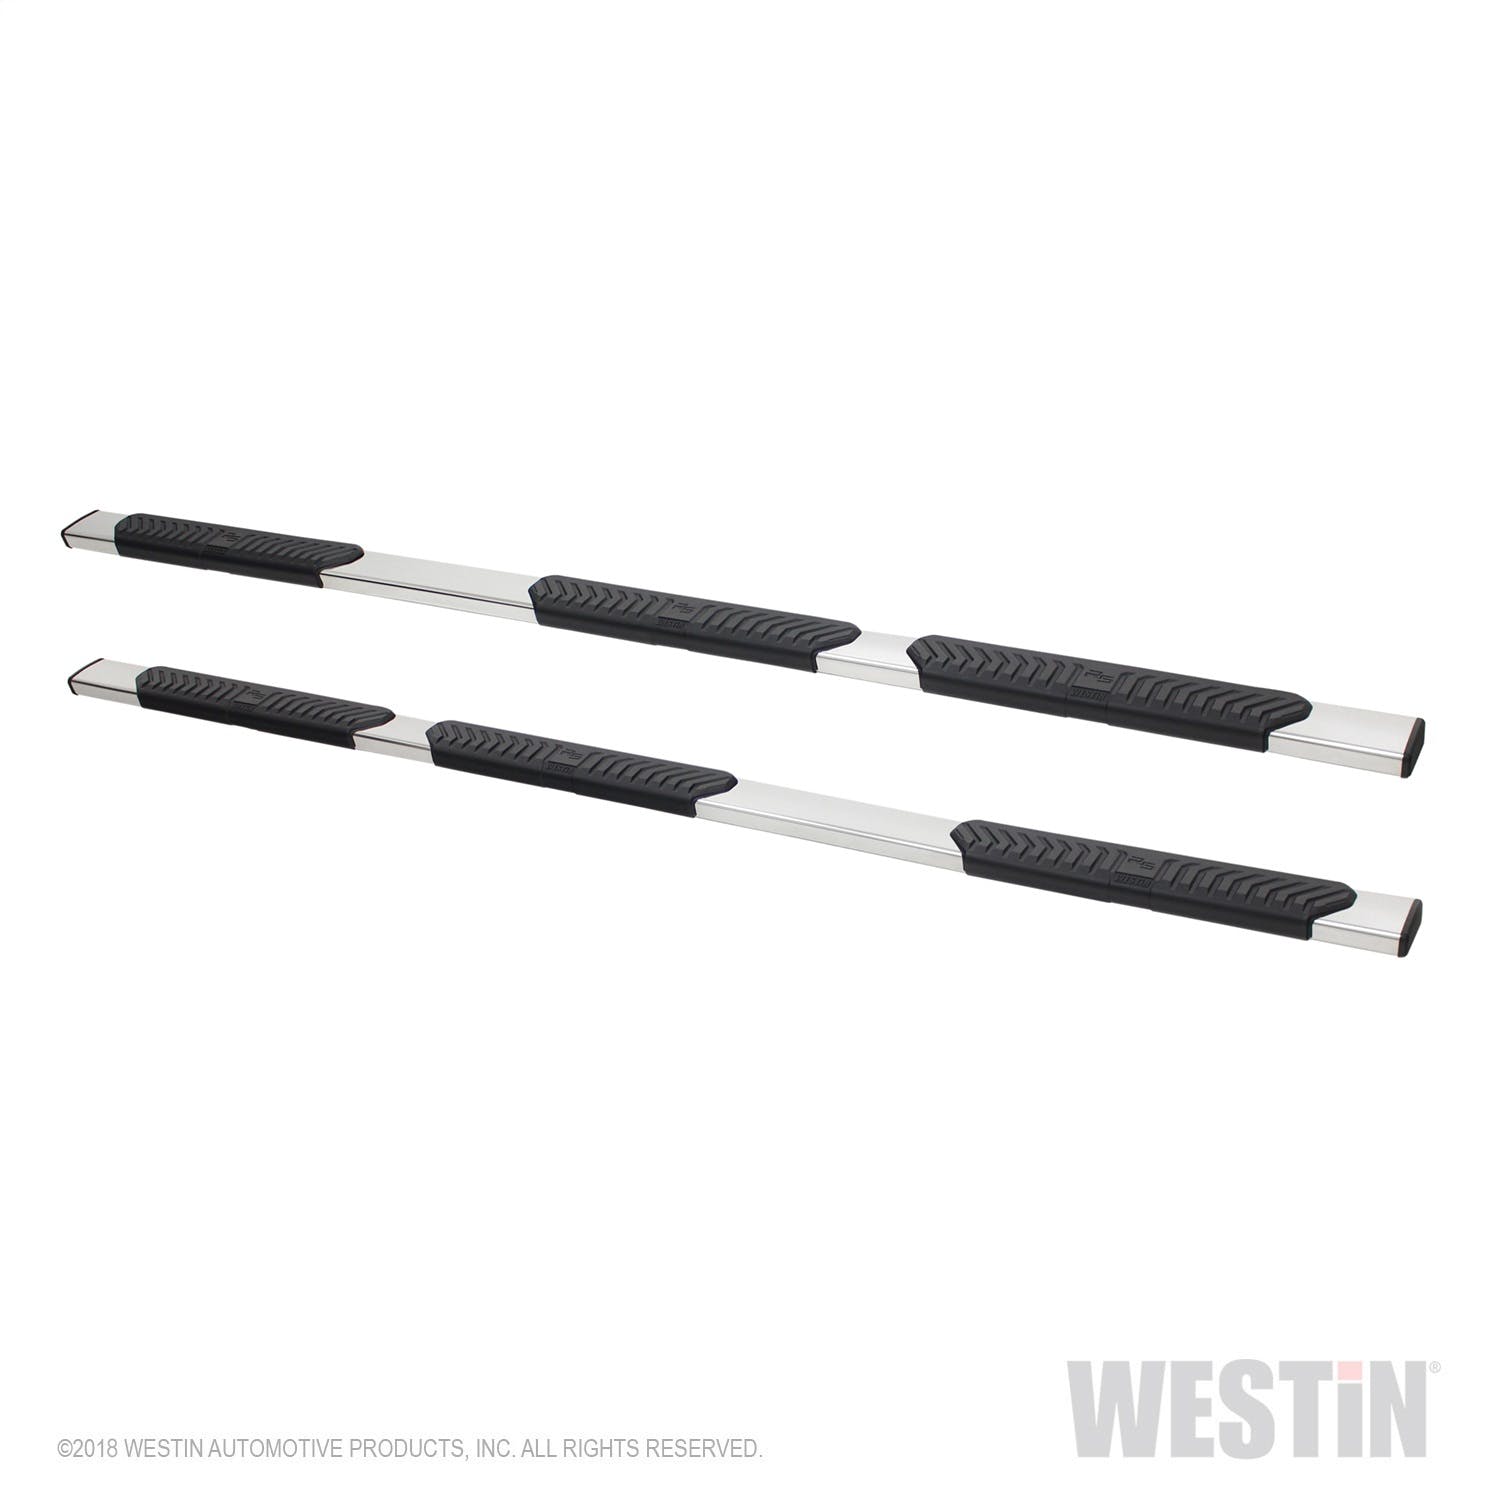 Westin Automotive 28-534680 R5 M-Series Wheel-to-Wheel Nerf Step Bars Polished Stainless